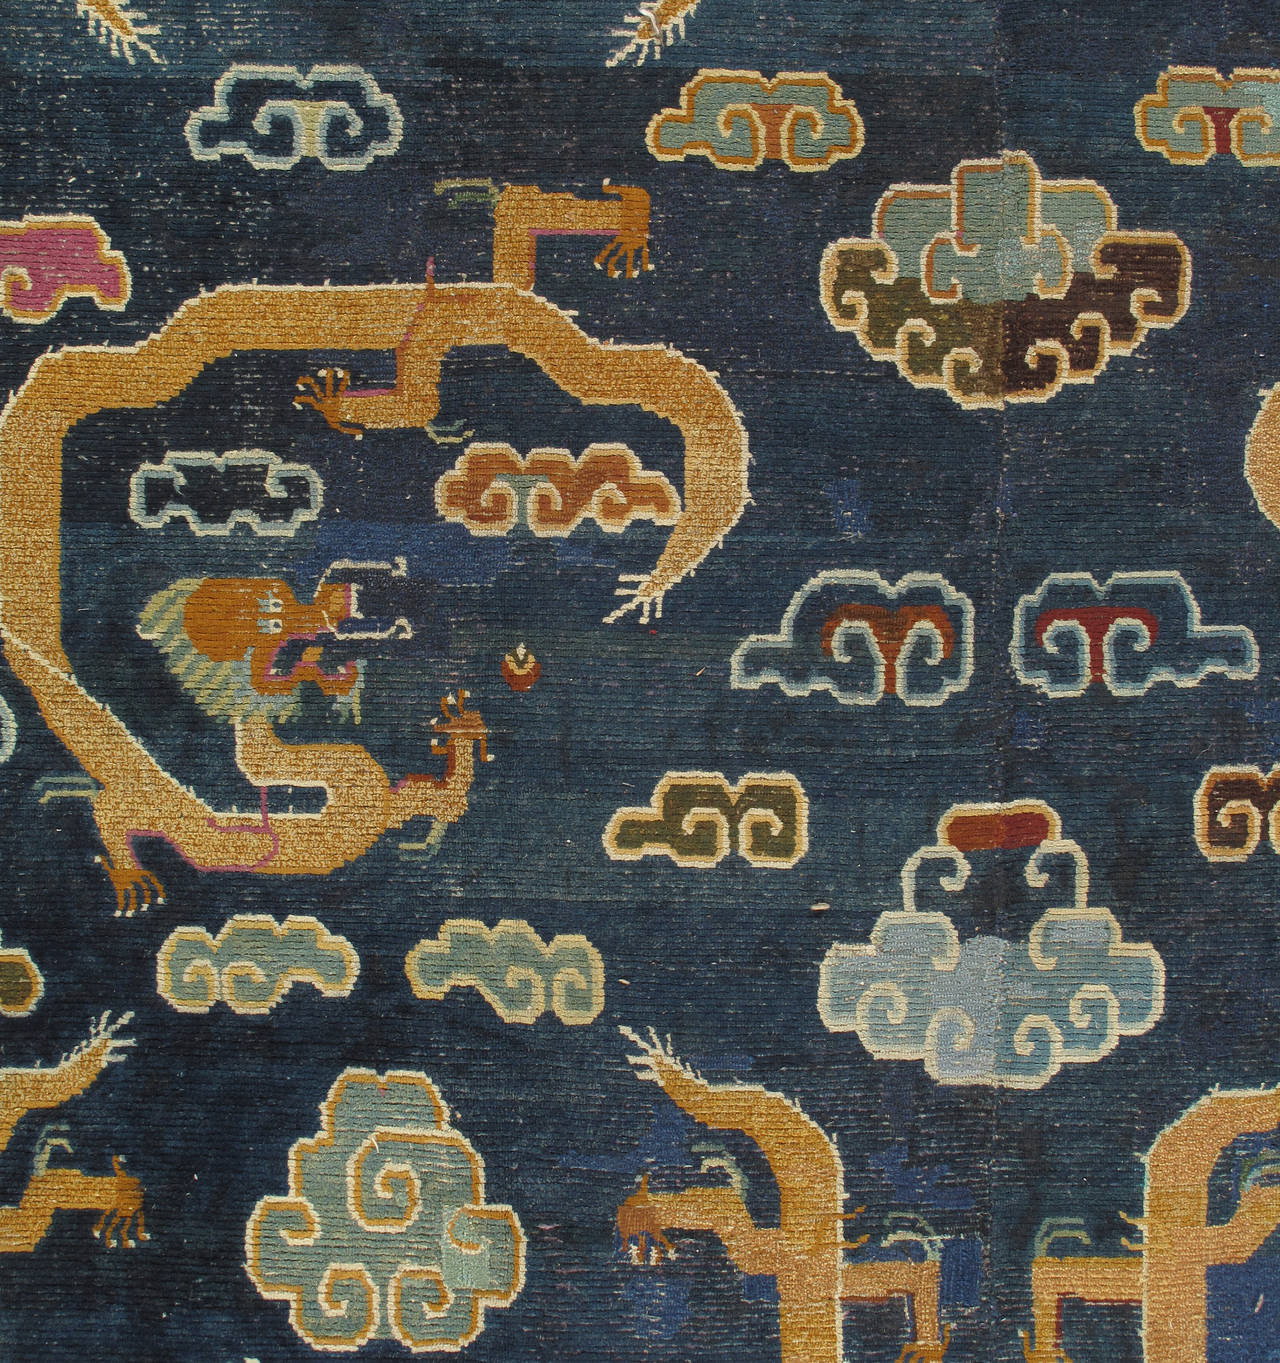 There are very few large, room-sized Tibetan carpets of any real age. This carpet has a four-two-four dragon array on a deep blue field. The dragons appear singly on smaller Tibetan rugs. There are volute edged clouds around and between the dragons